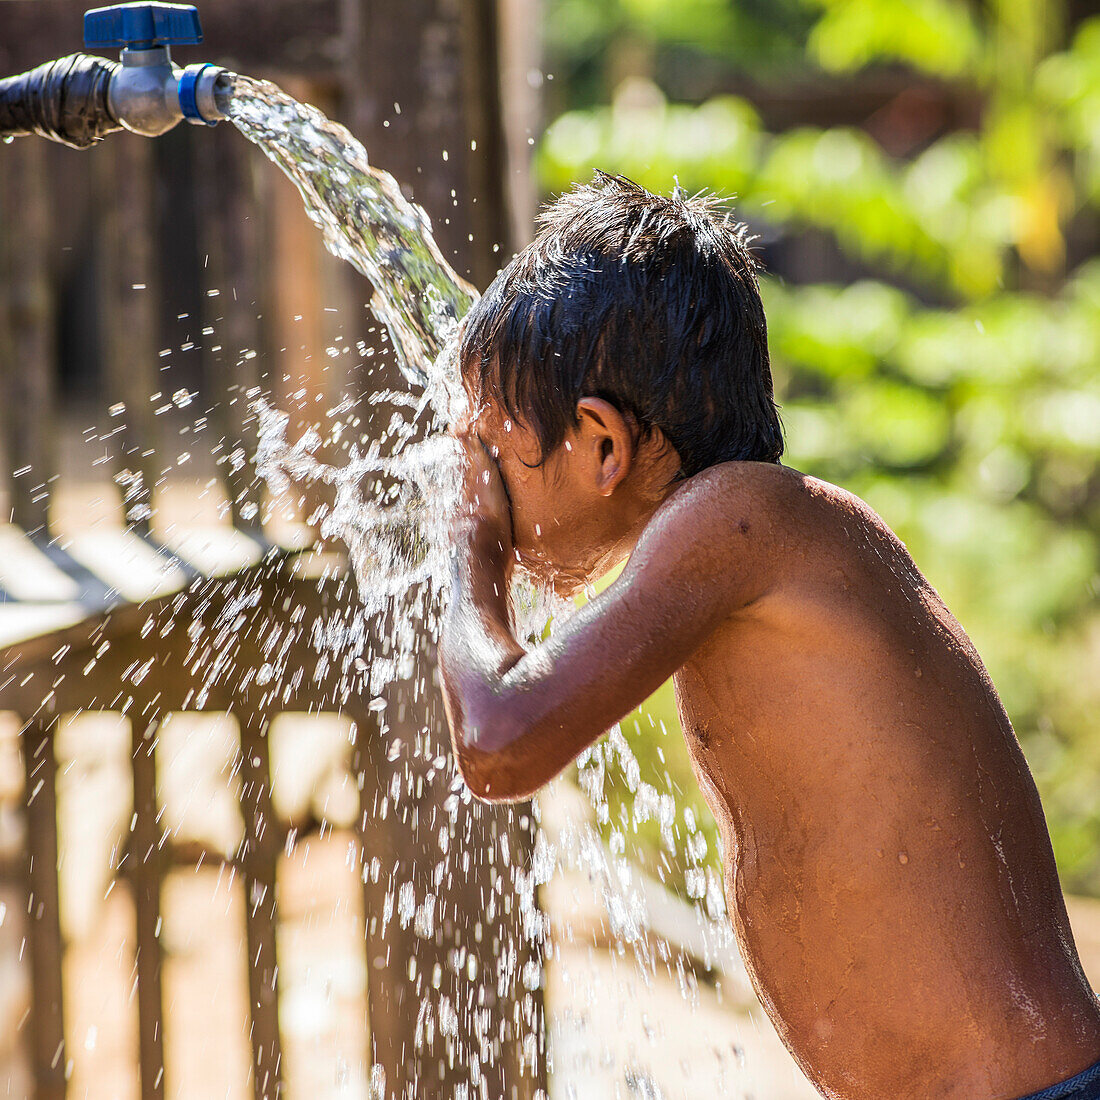 'A boy stands under a tap and cleans his face with the splashing water, Kamu village; Tambon Po, Chang Wat Chiang Rai, Thailand'